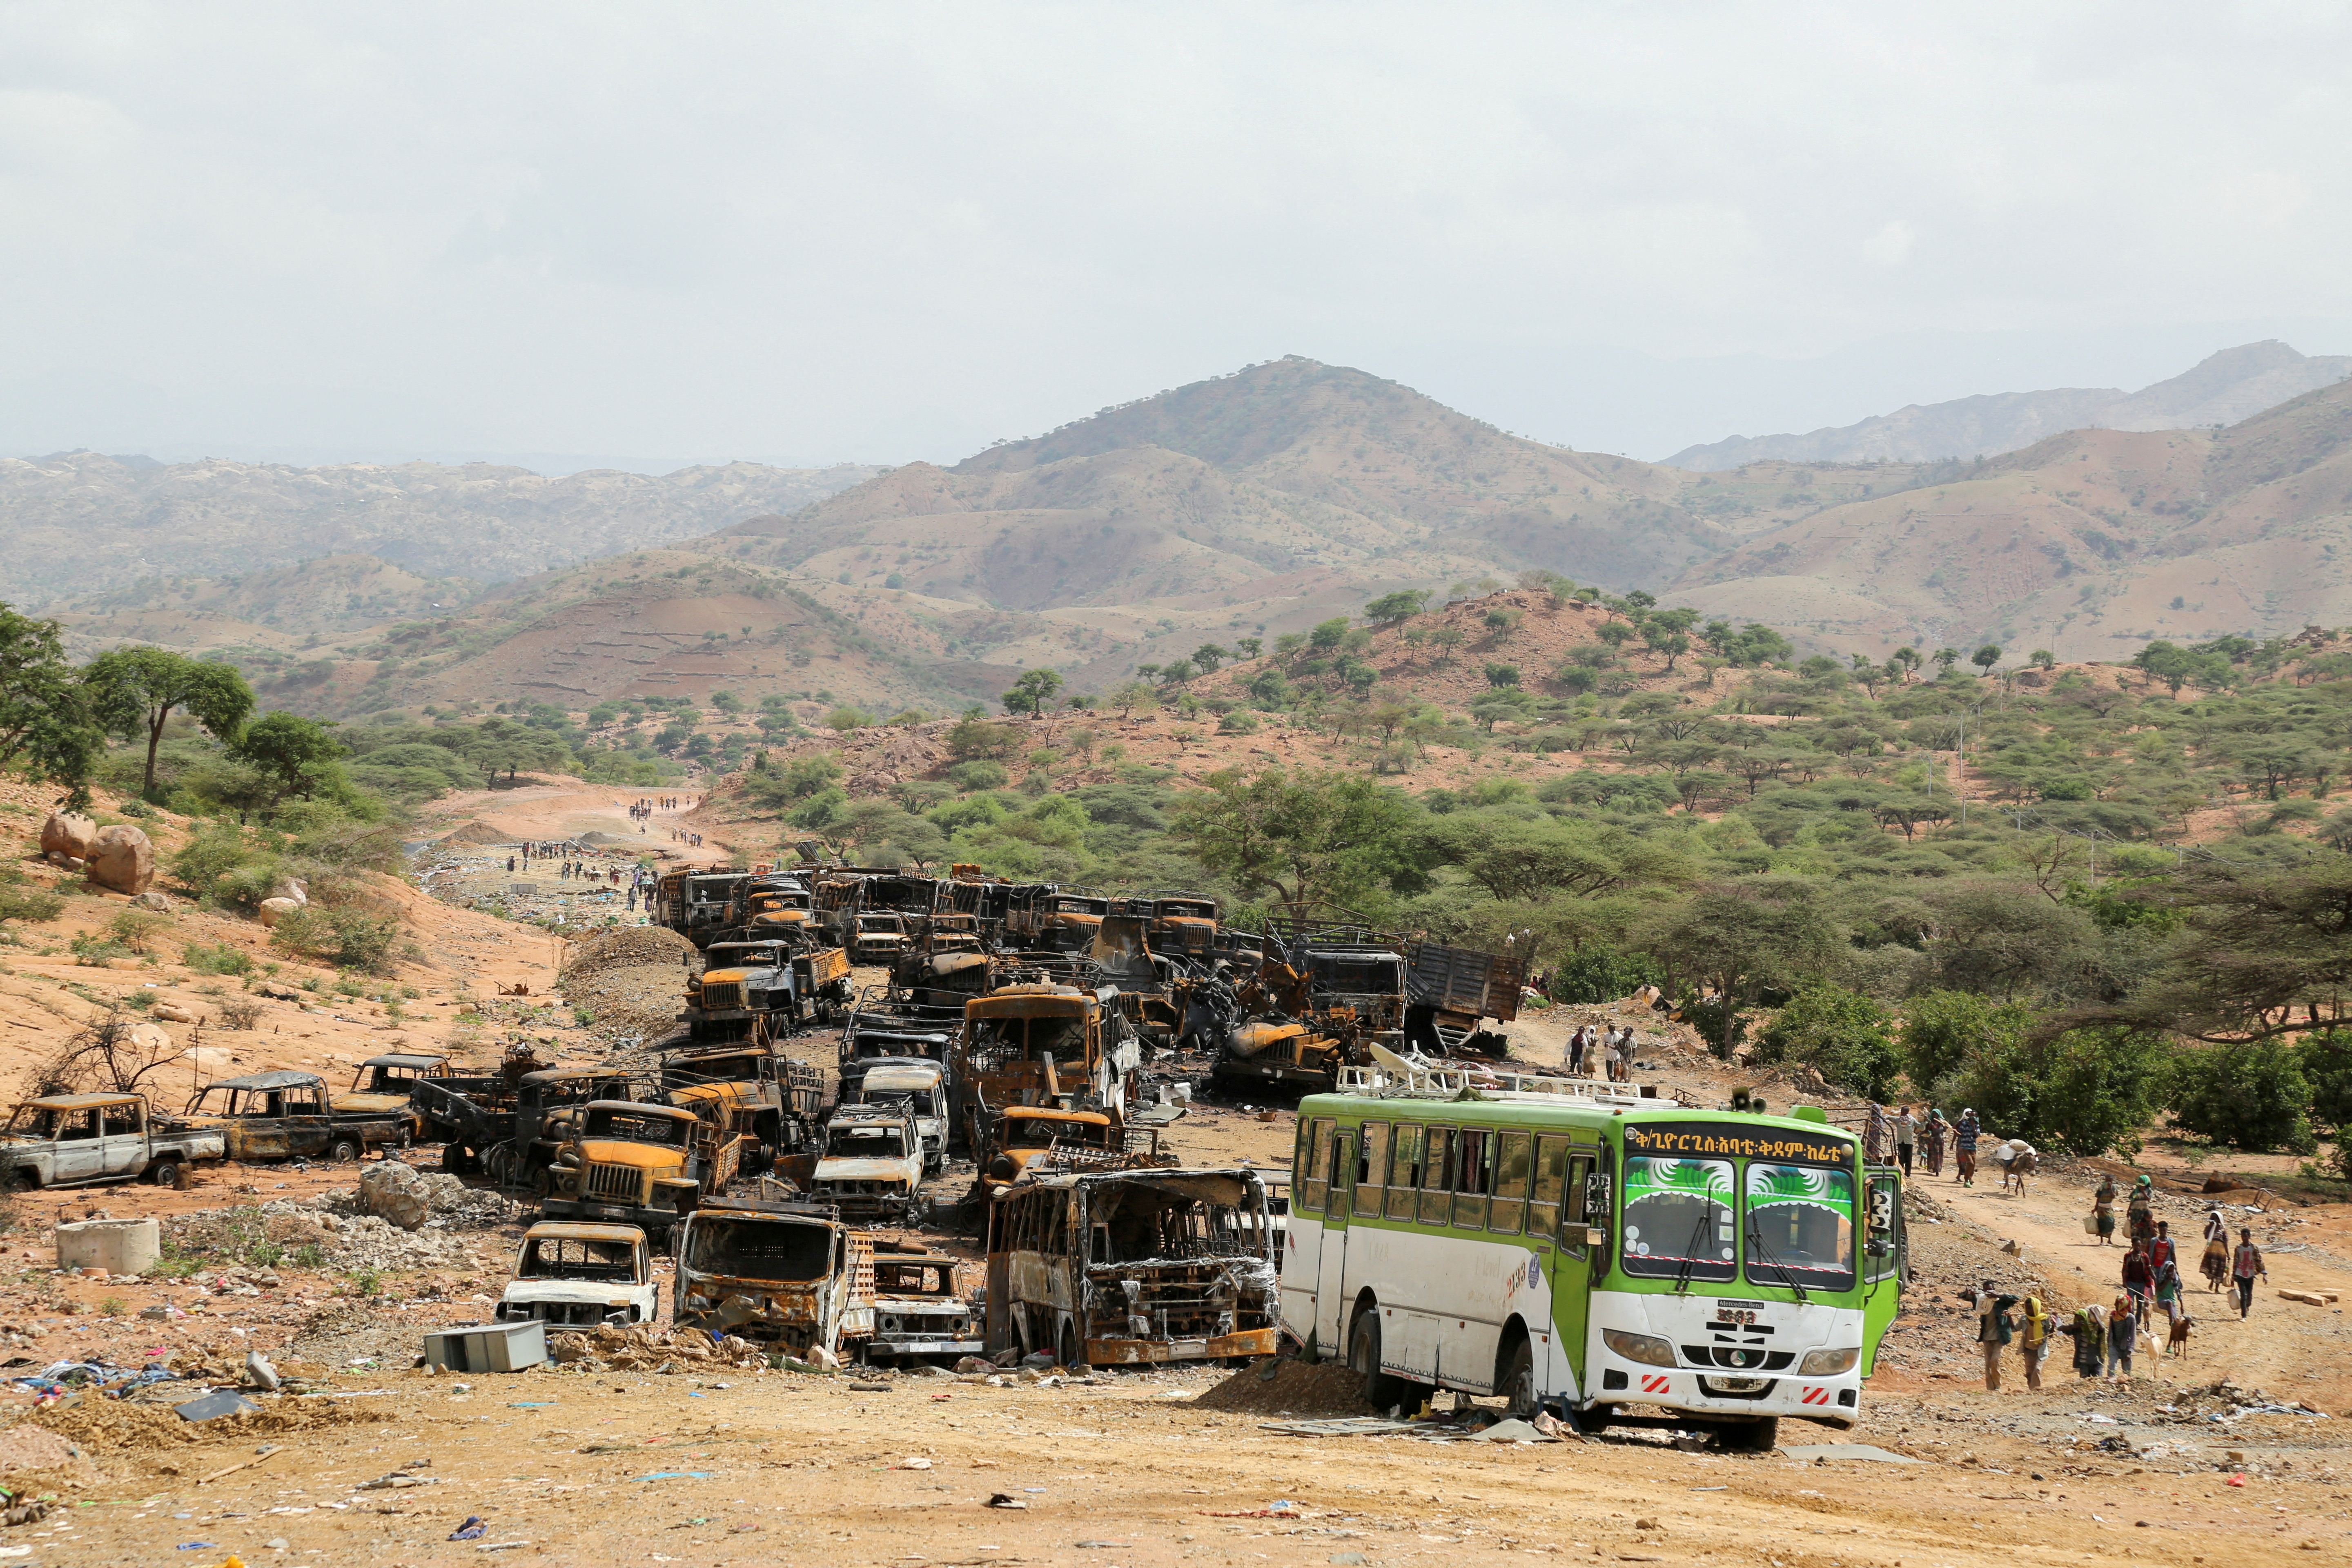 Villagers return from a market to Yechila town walking past scores of burned vehicles, in Tigray, Ethiopia